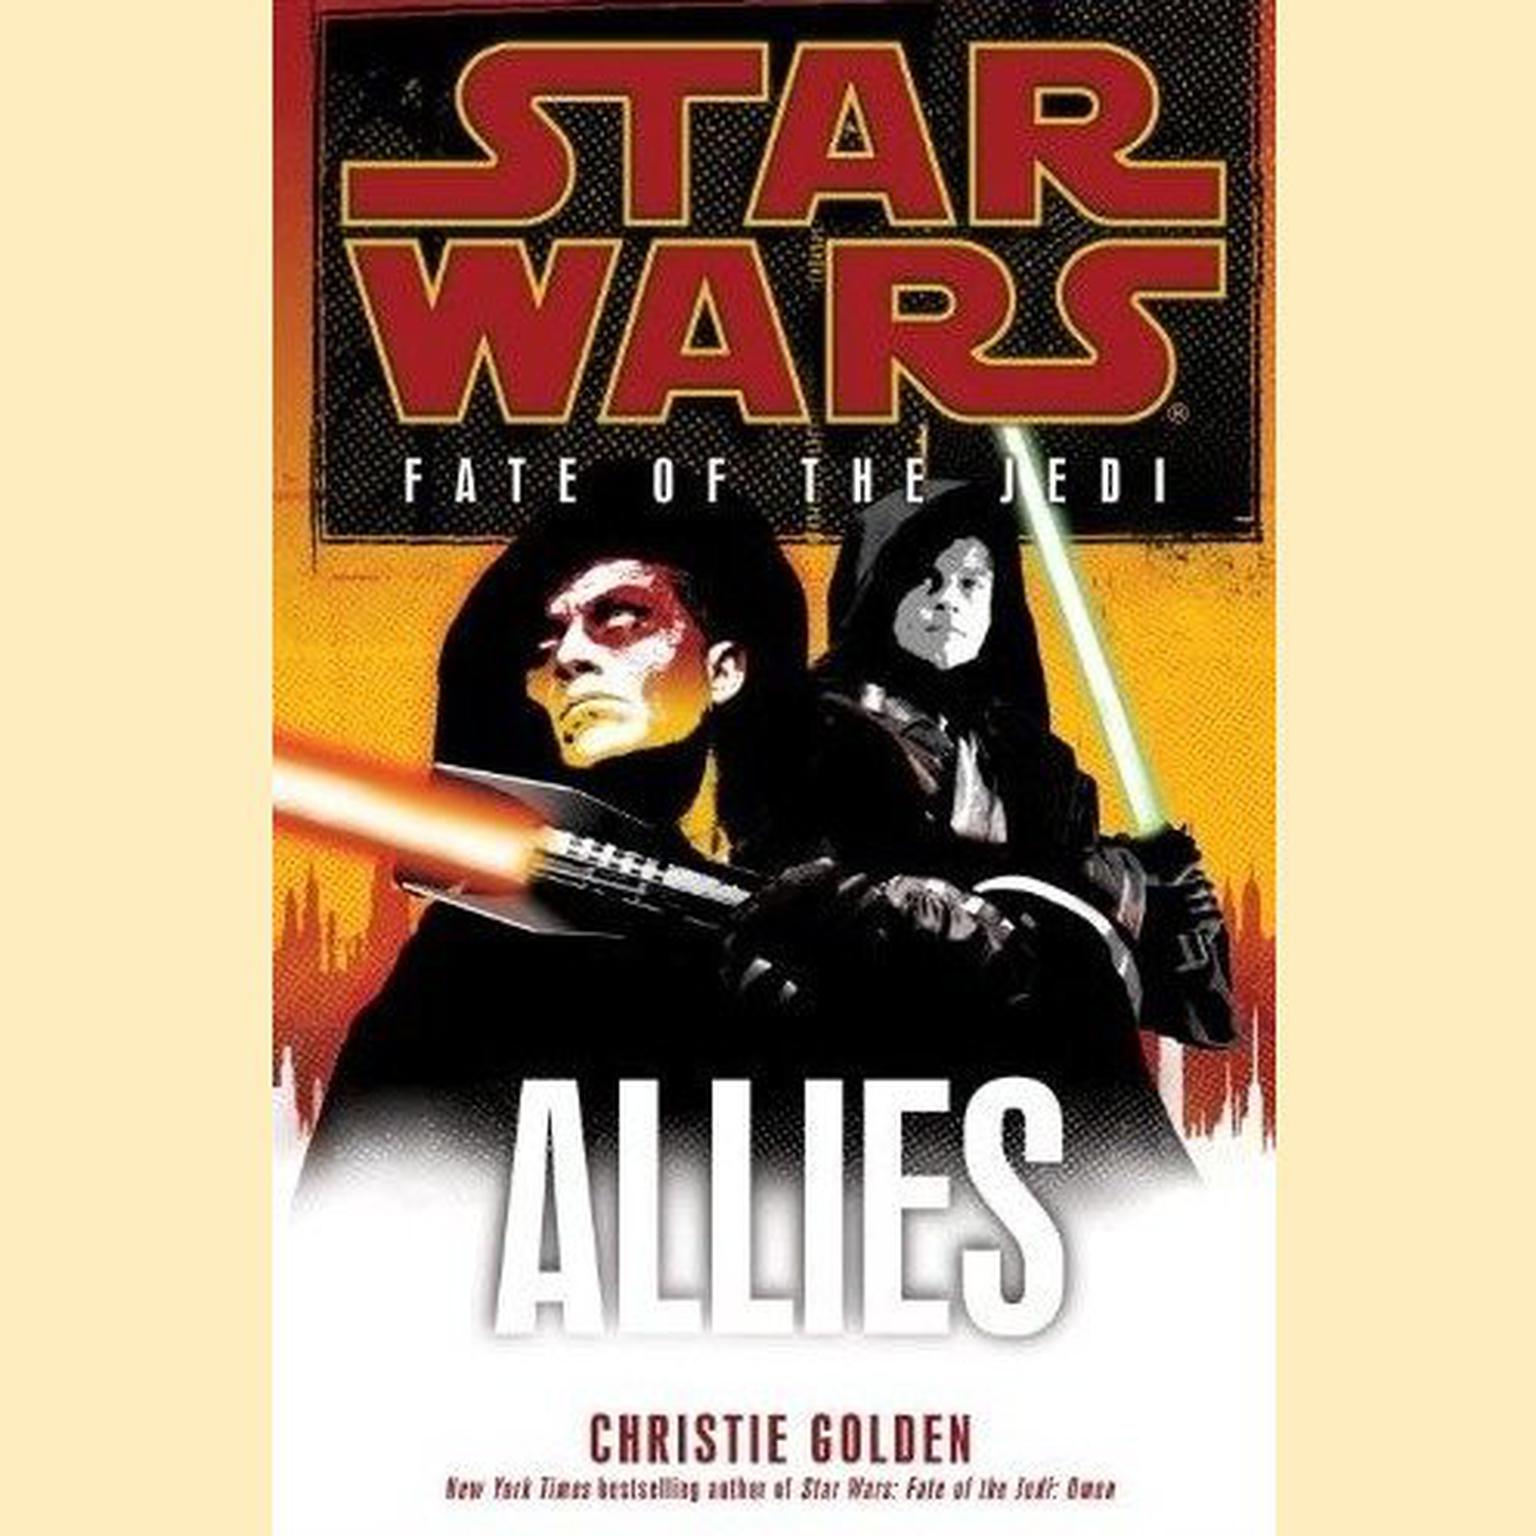 Allies: Star Wars (Fate of the Jedi) Audiobook, by Christie Golden